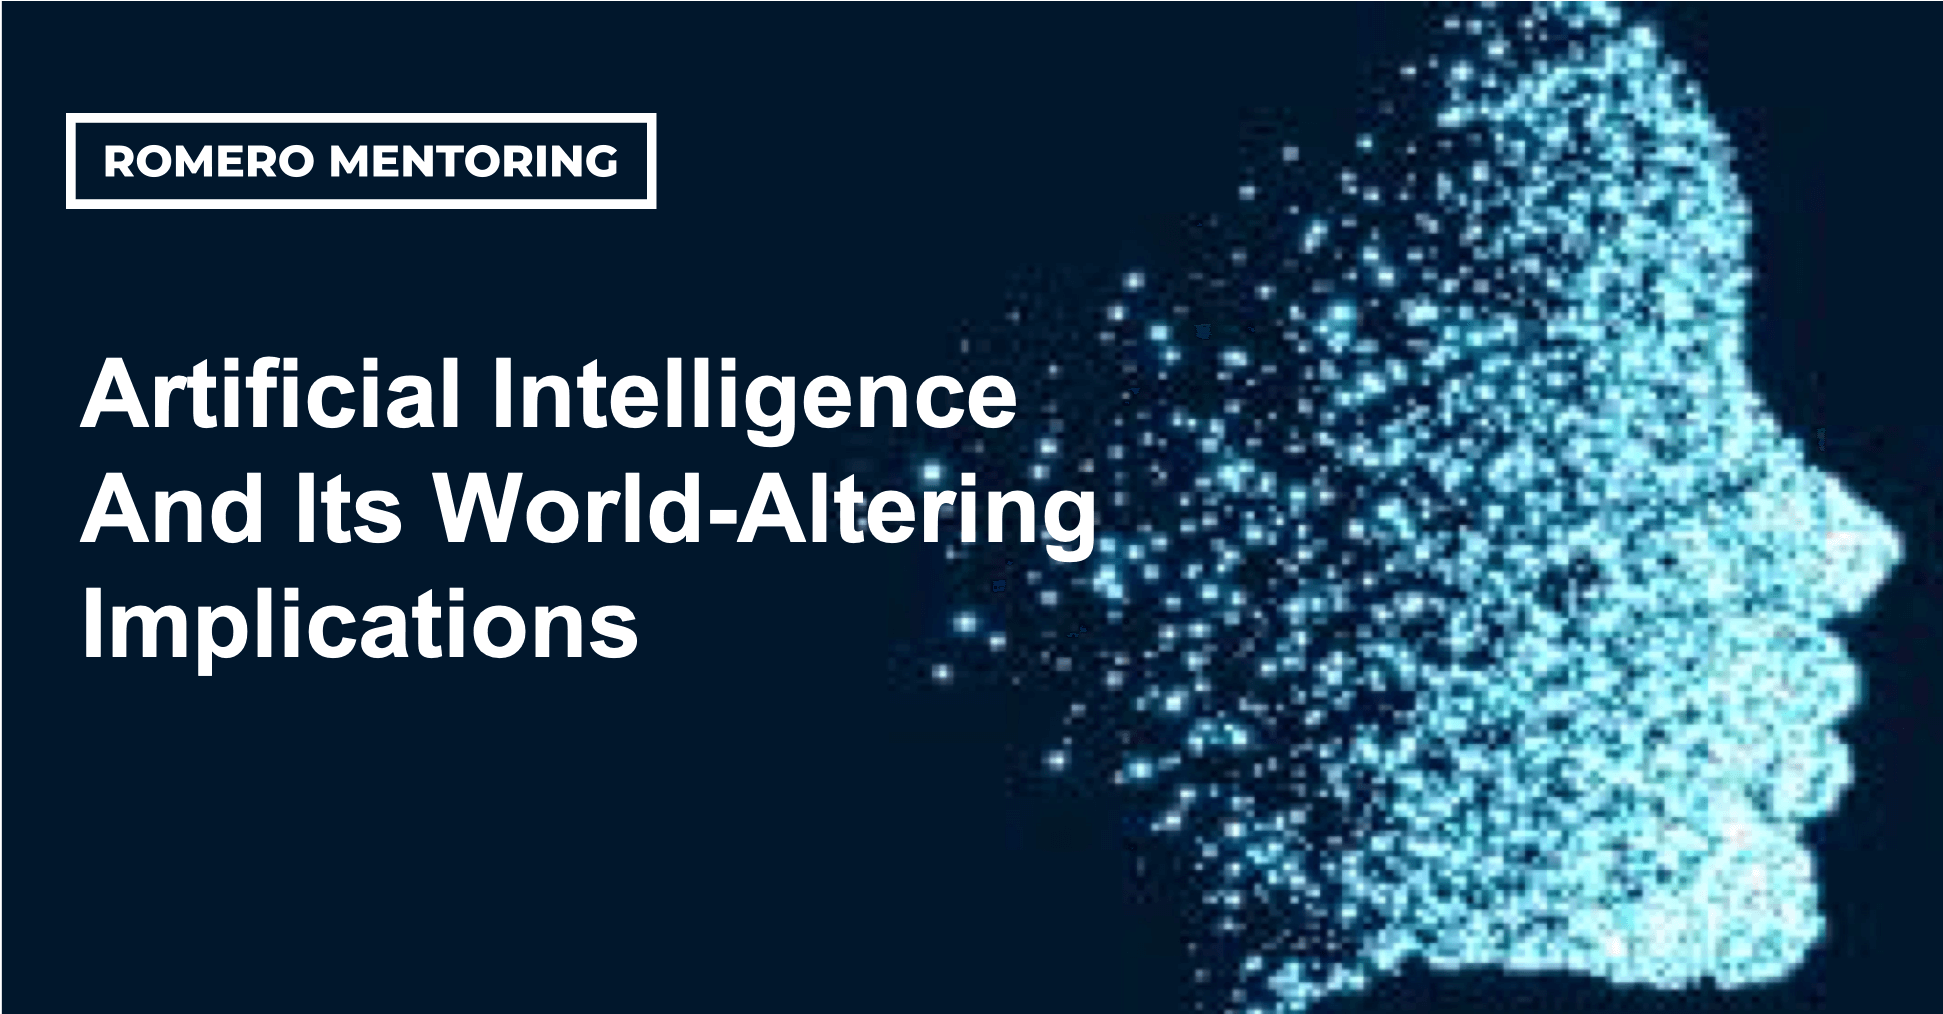 Artificial Intelligence And Its World-Altering Implications